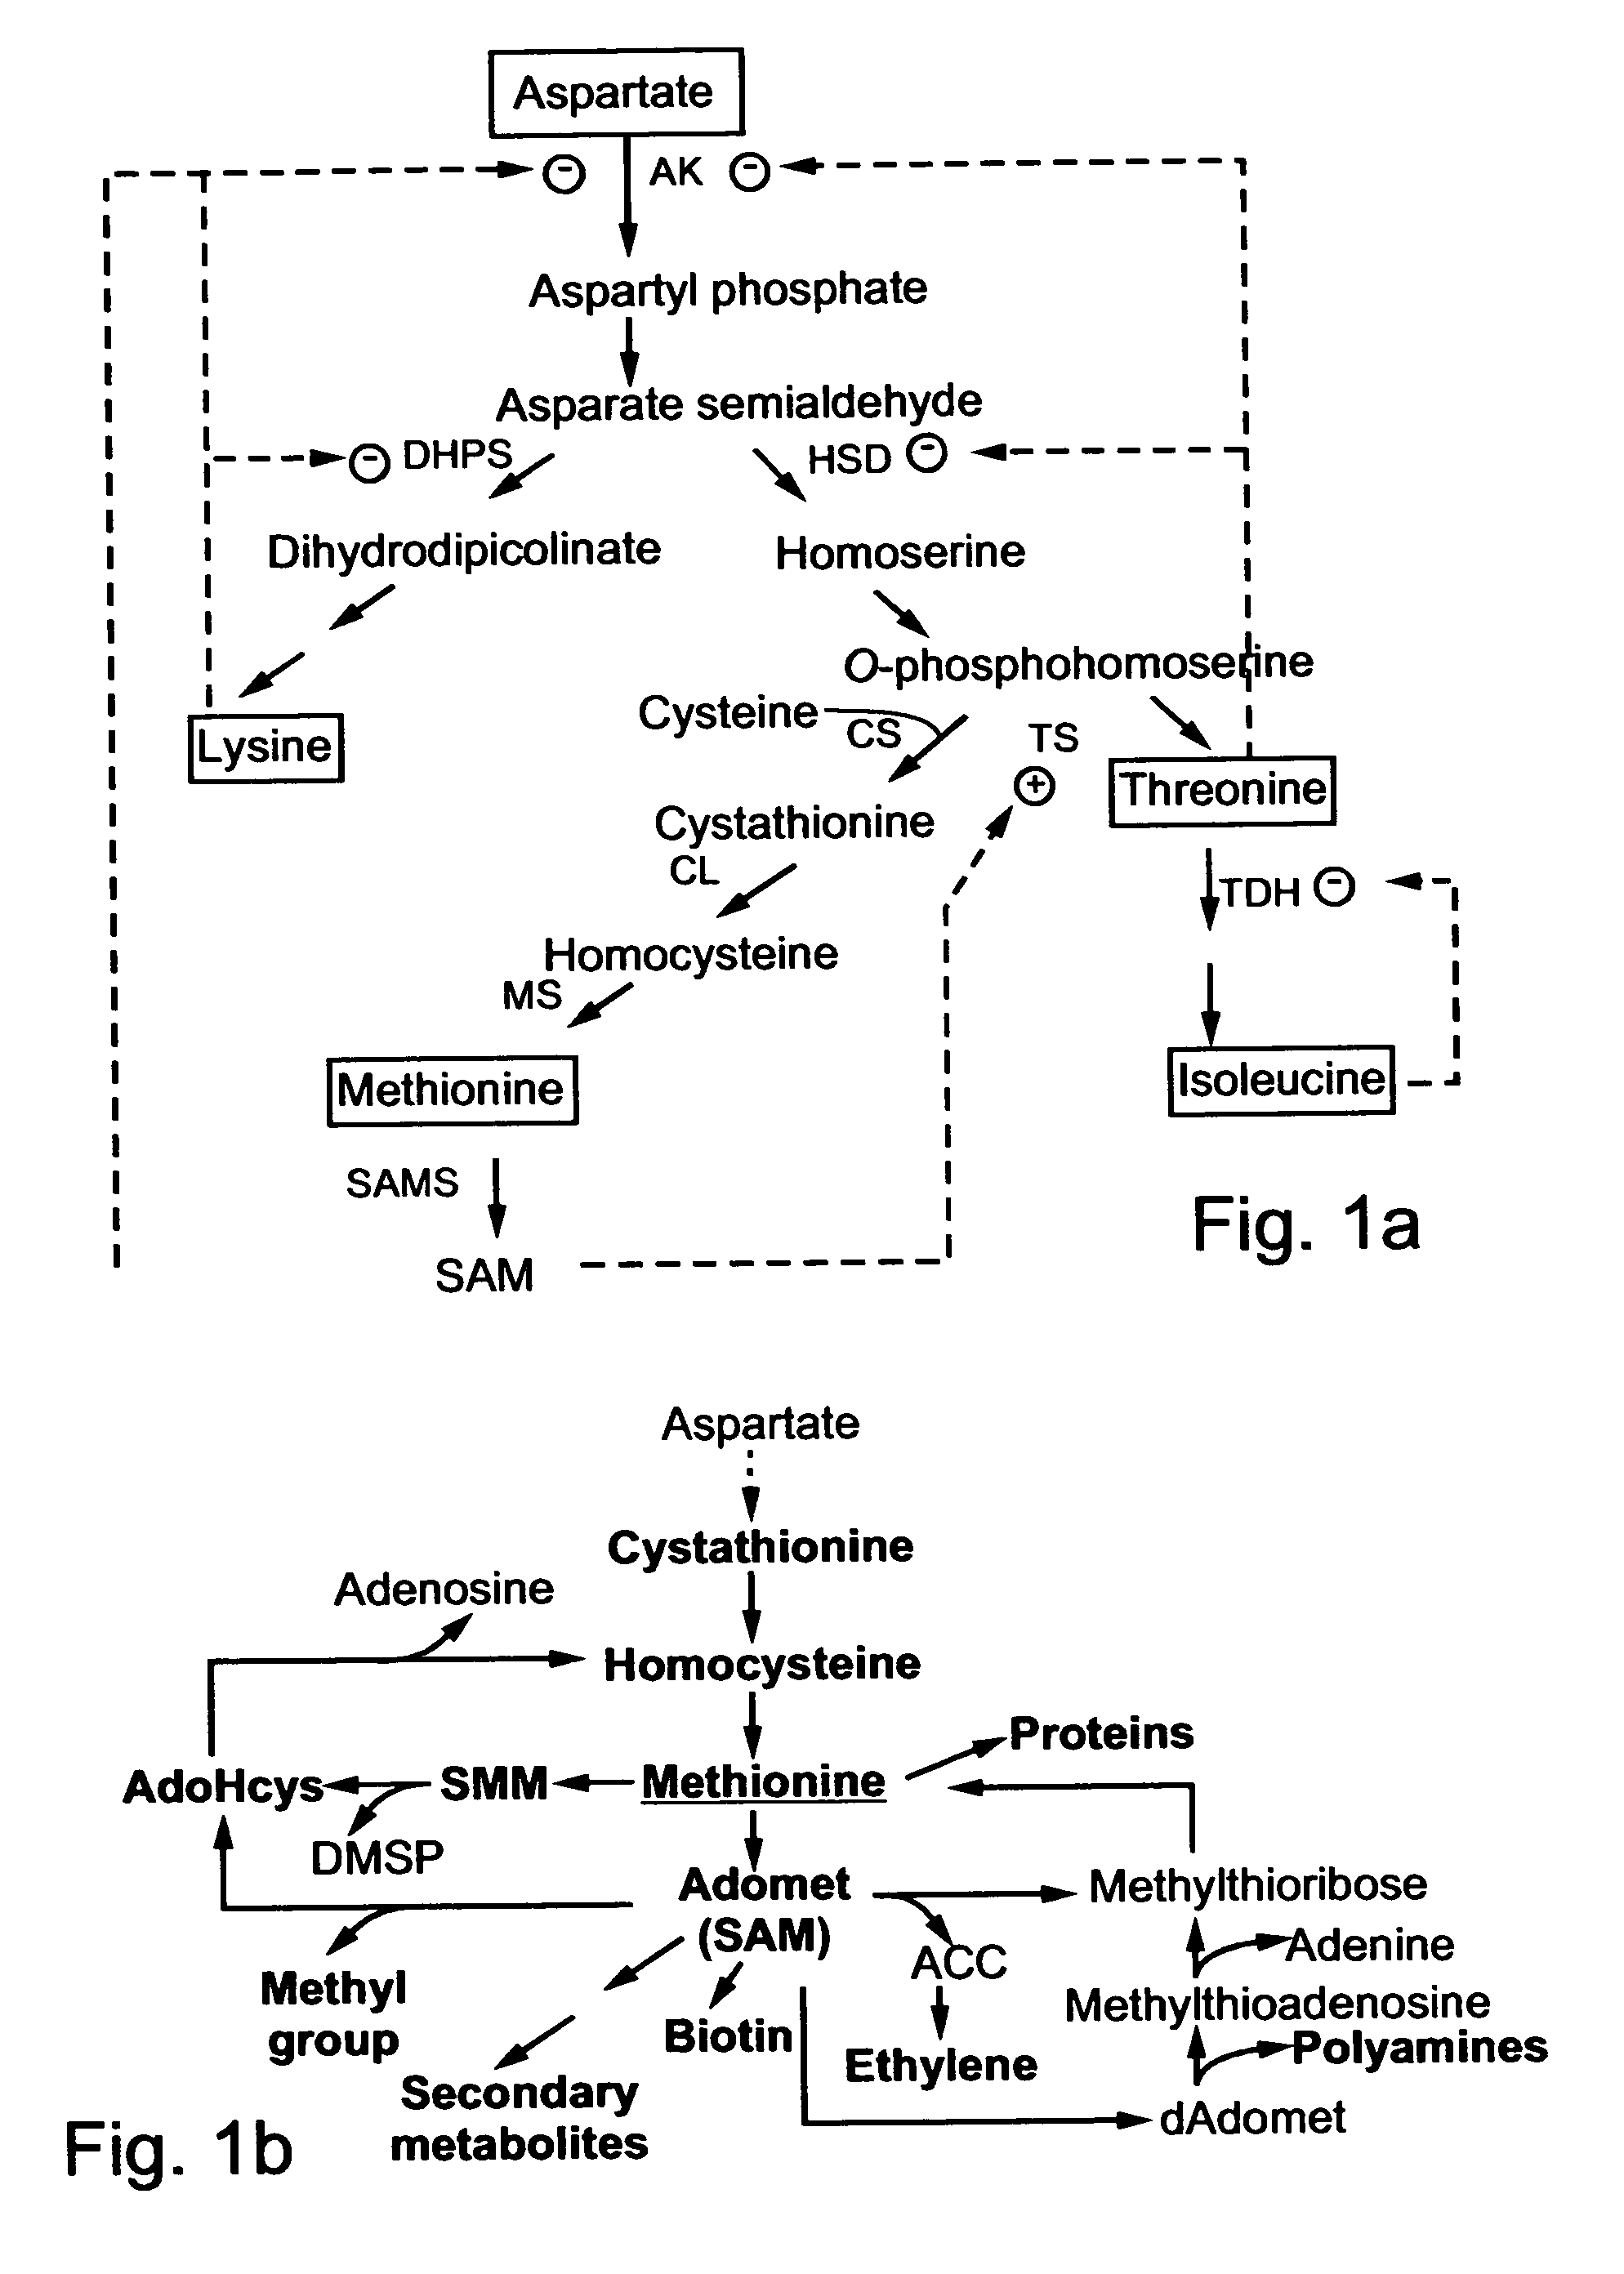 Plants characterized by an increased content of methionine and related metabolites, methods of generating same and uses thereof